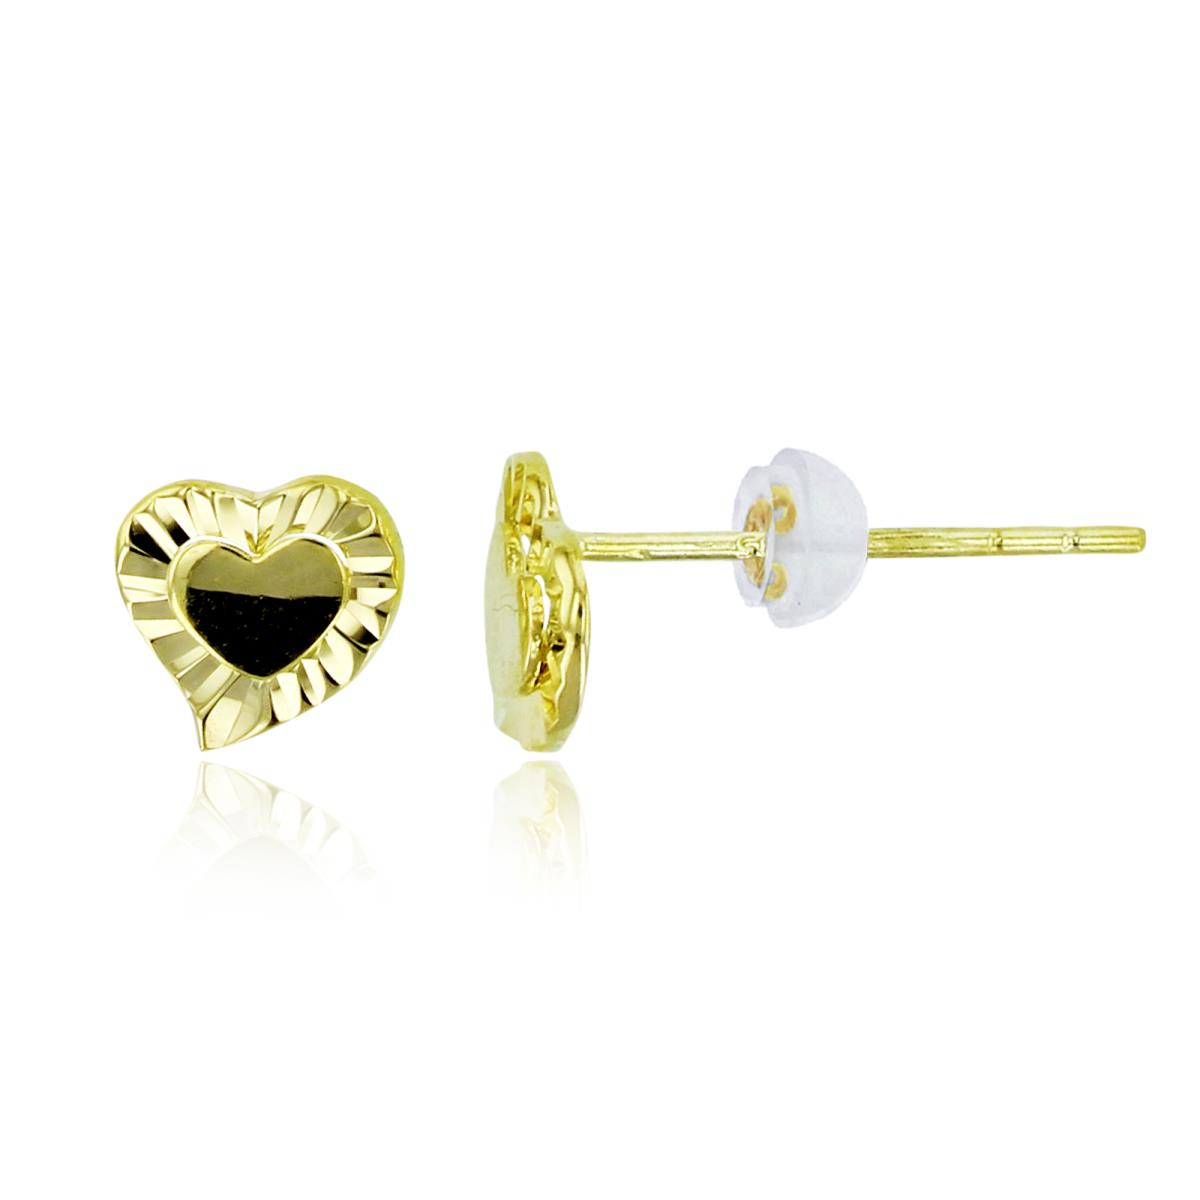 10K Yellow Gold Diamond Cut Heart Studs with Silicon Backs